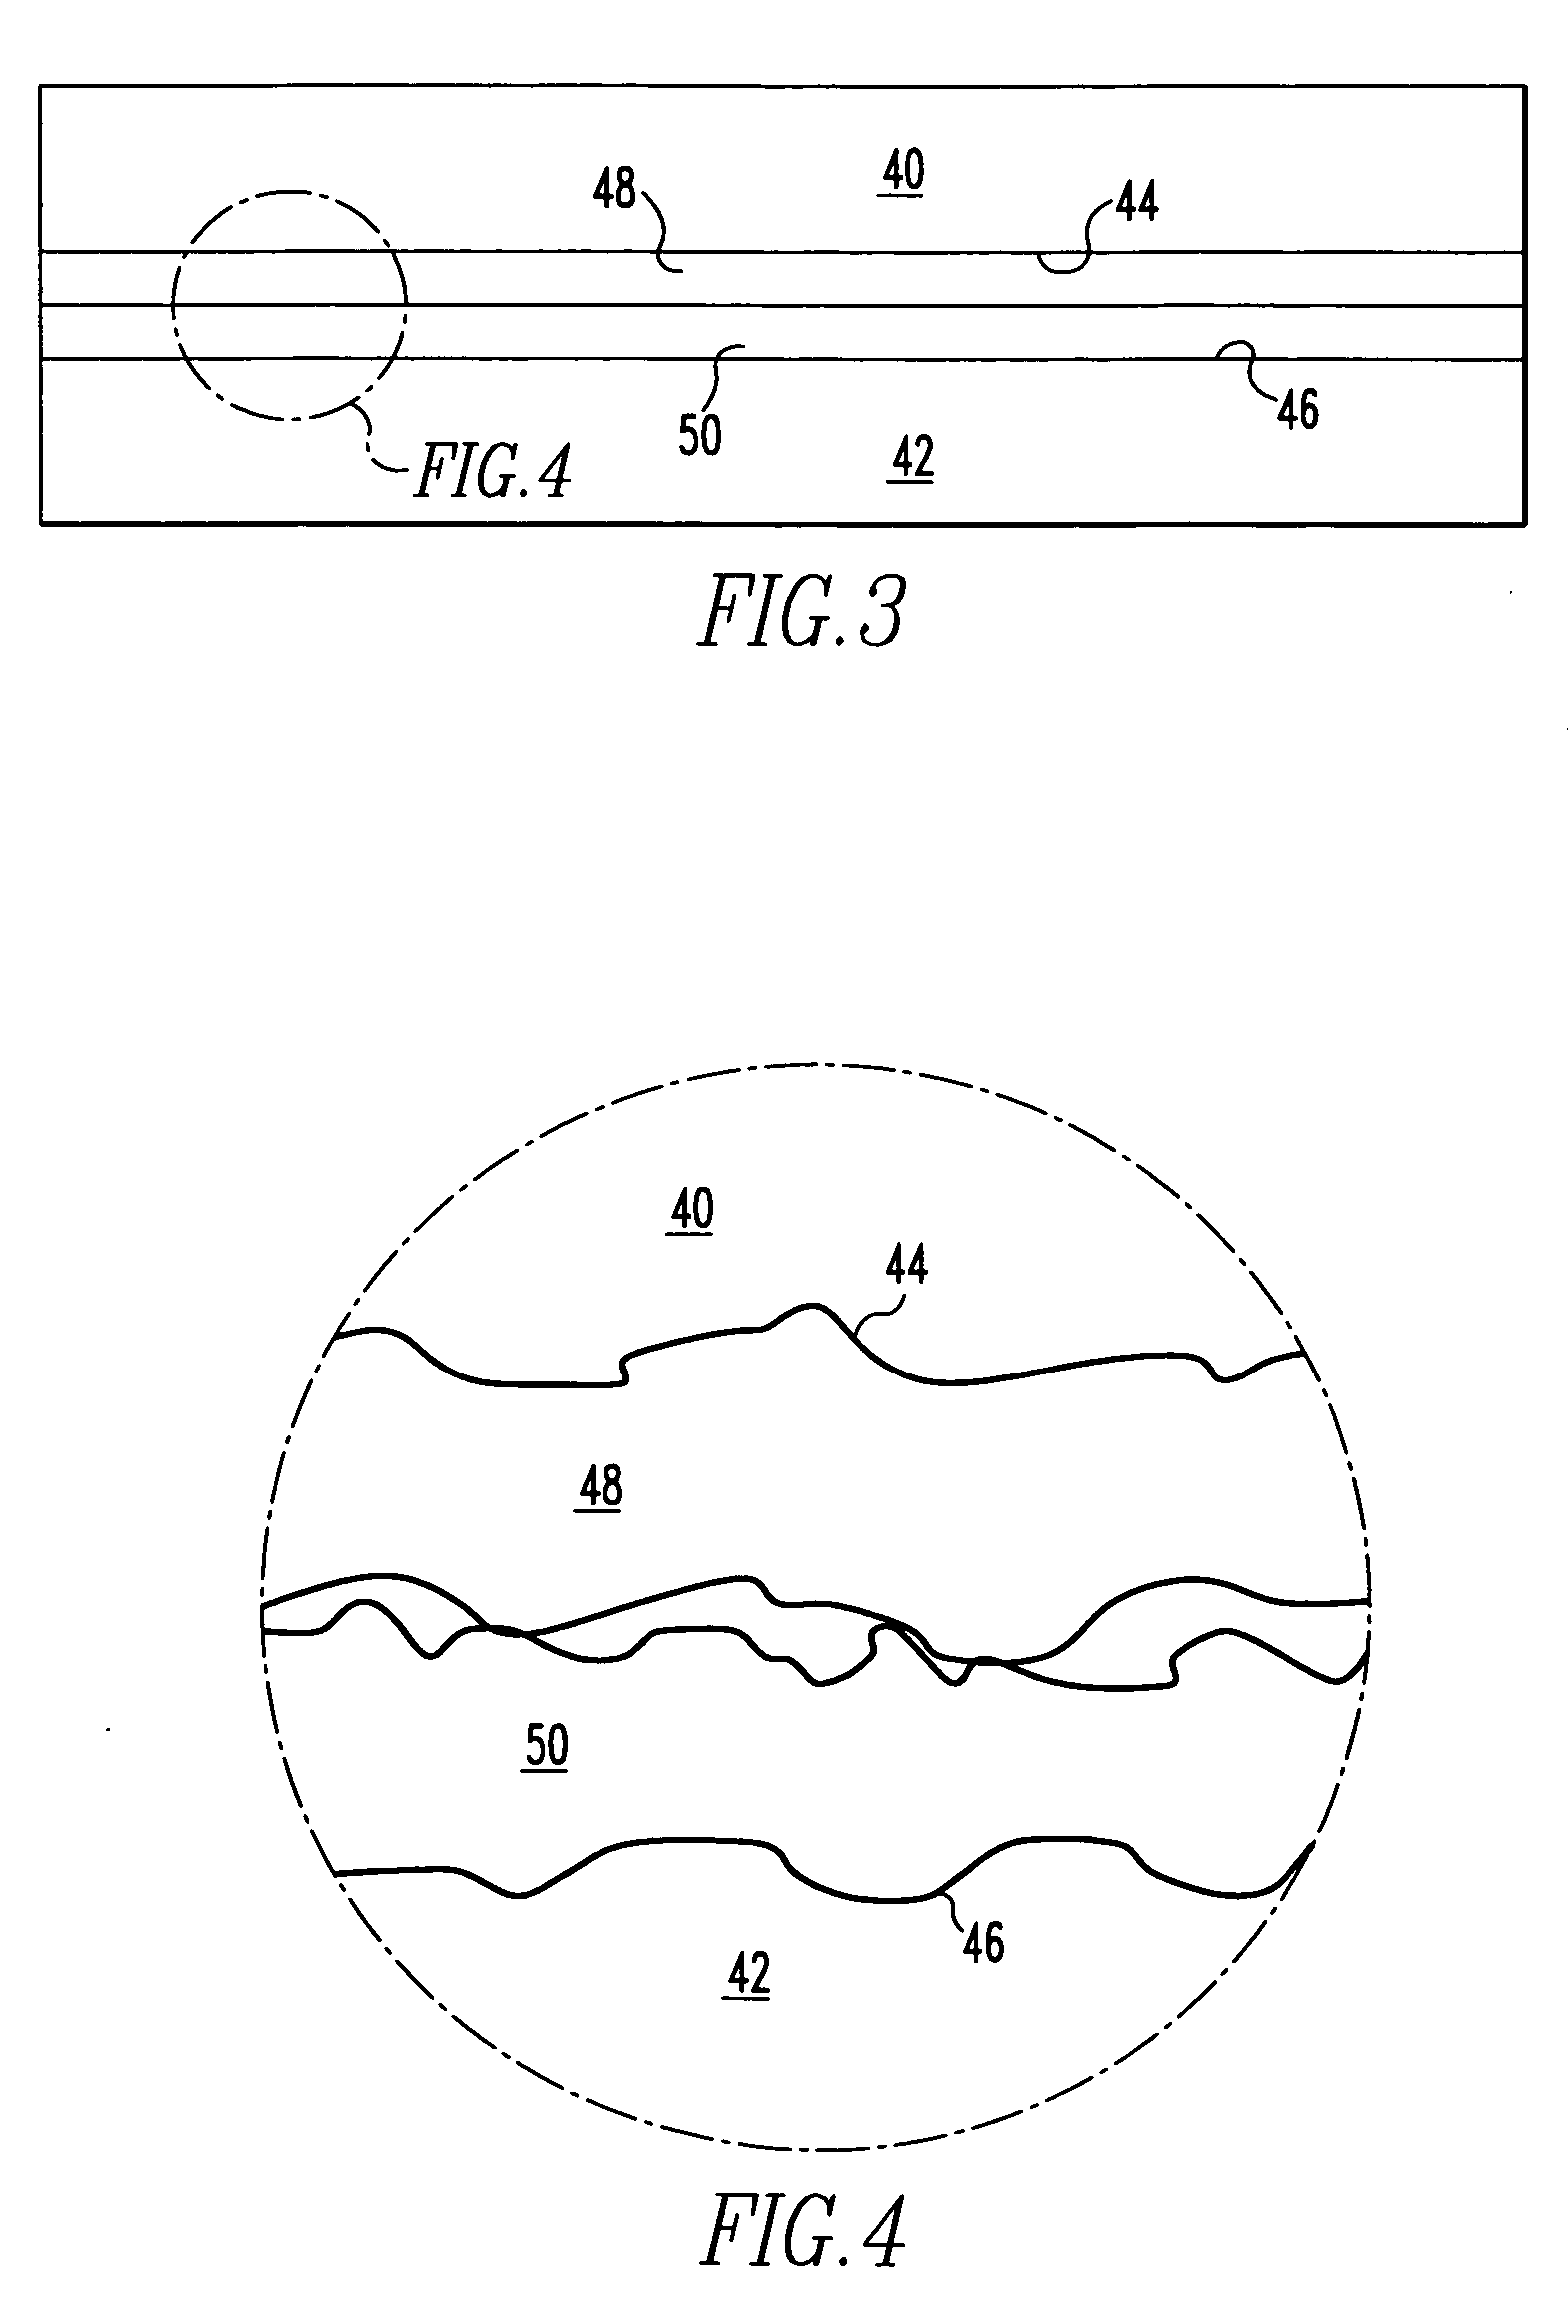 Method of diffusion bonding of nickel based superalloy substrates